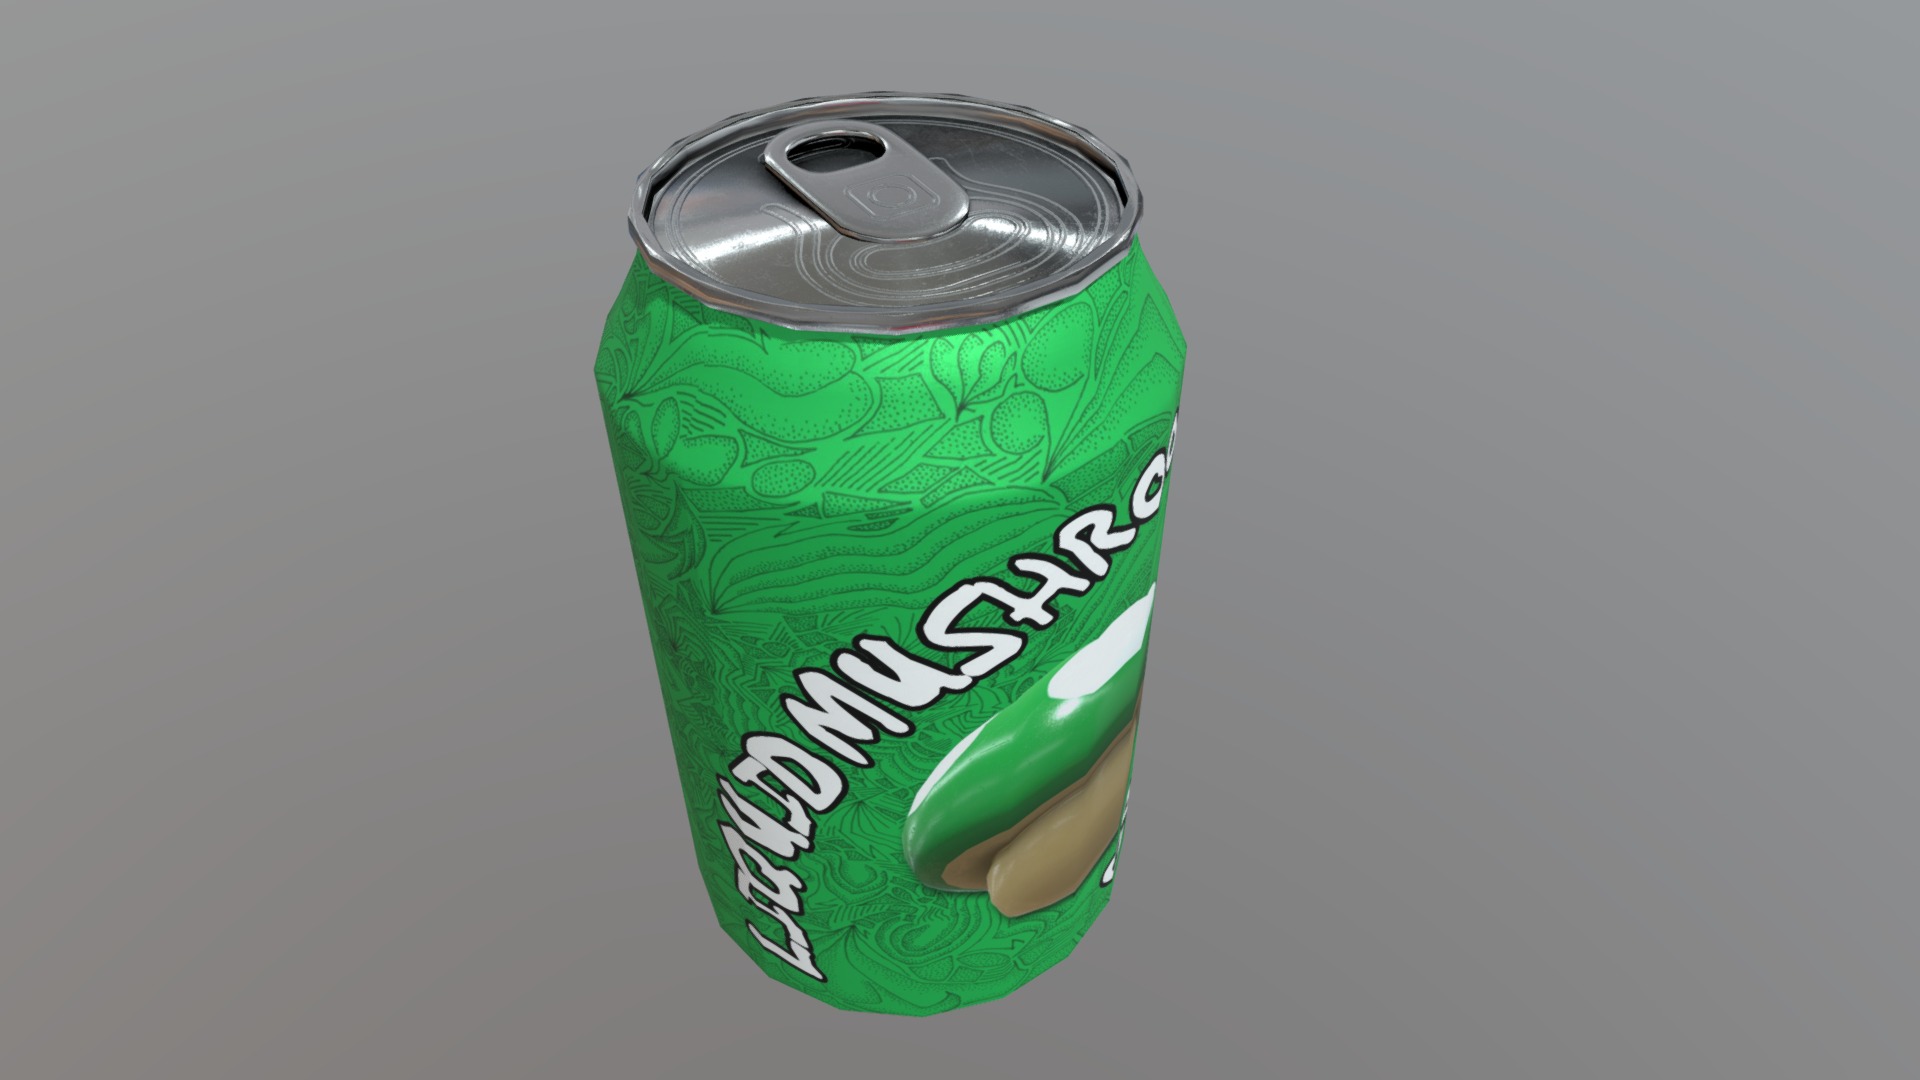 3D model Beverage Can – Liquid Mushroom - This is a 3D model of the Beverage Can - Liquid Mushroom. The 3D model is about a green can with a white label.